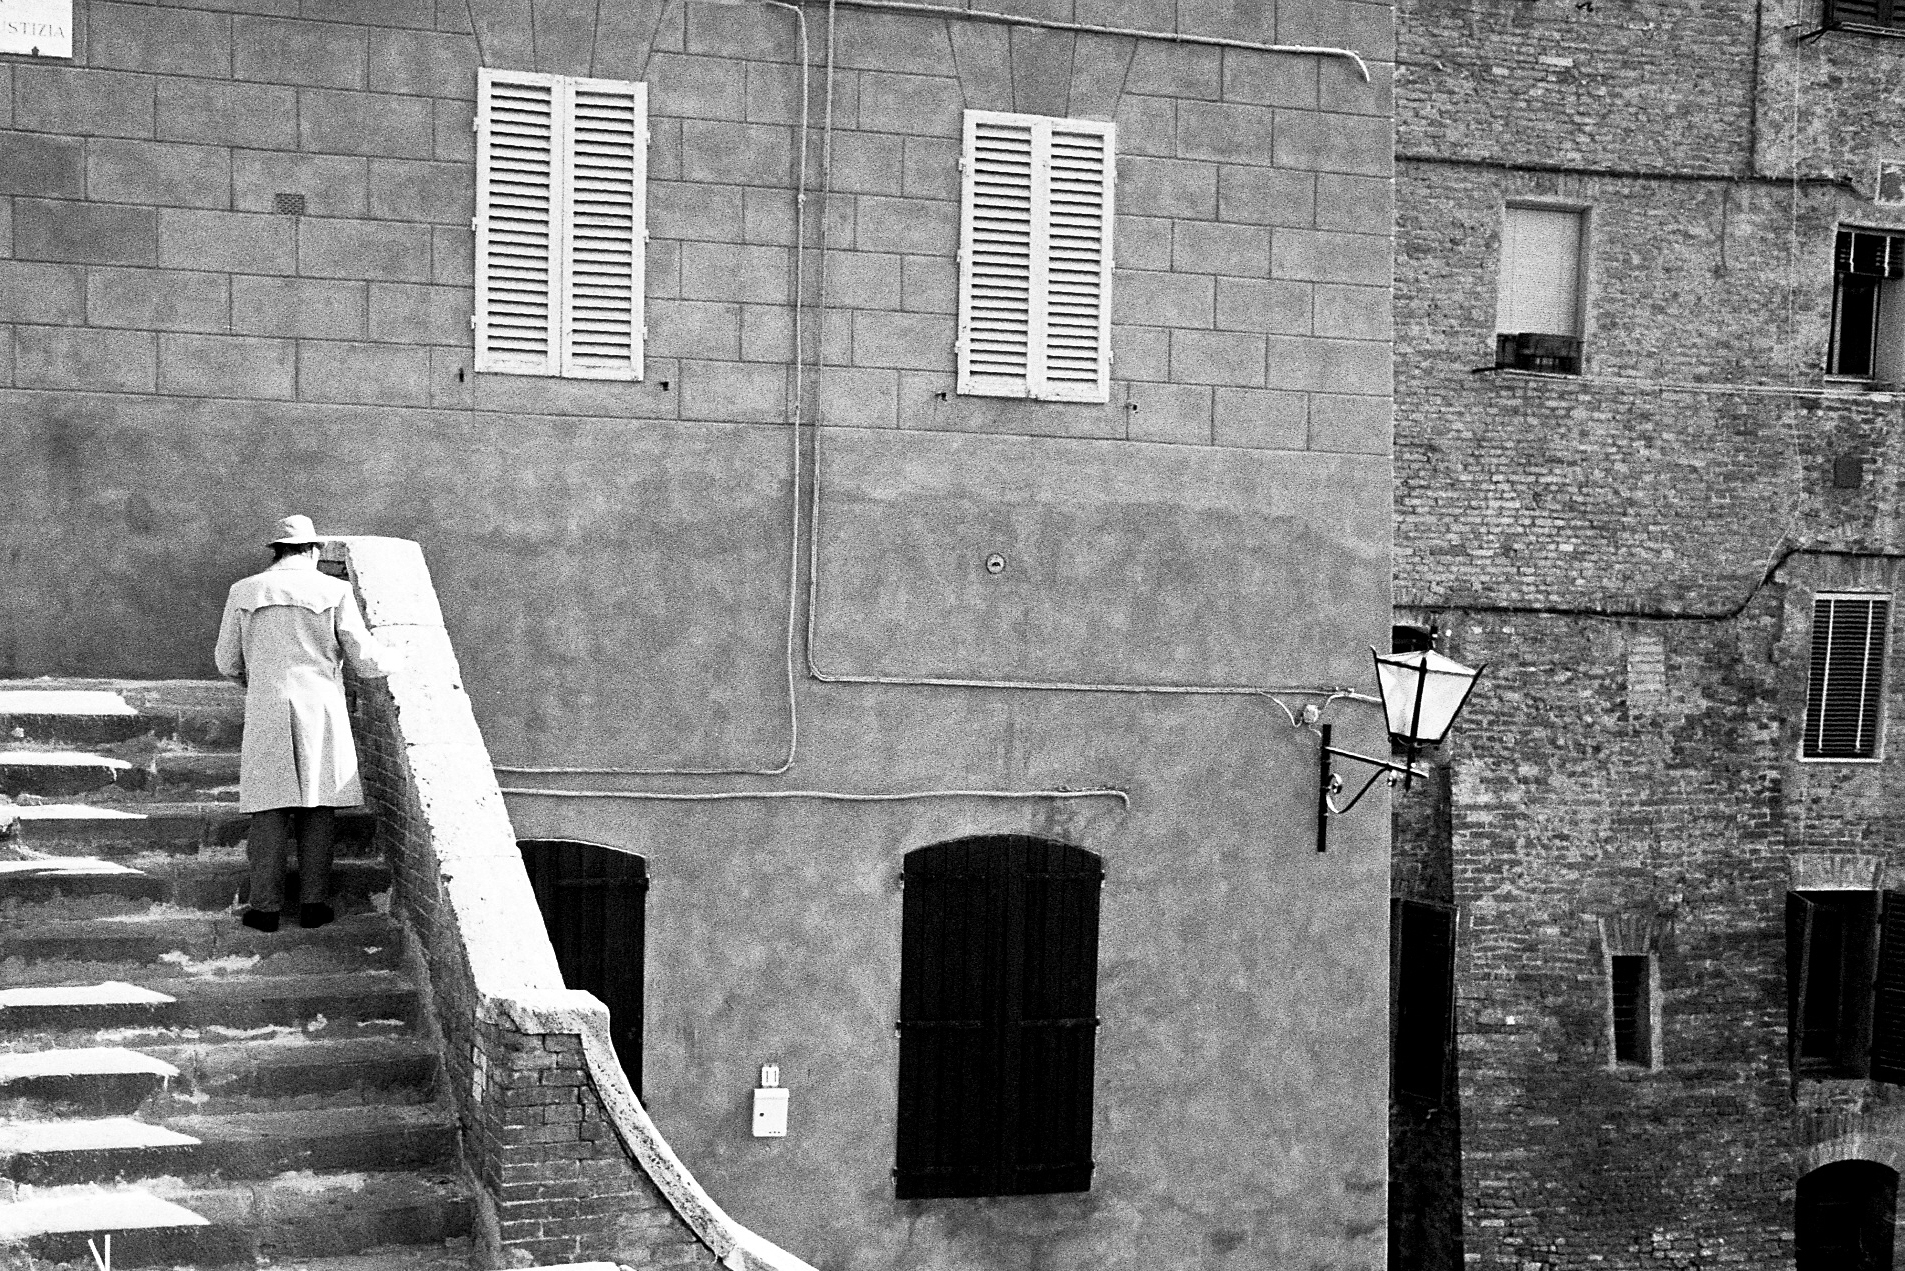 the staircase in front of an old building with two balconies and a white umbrella